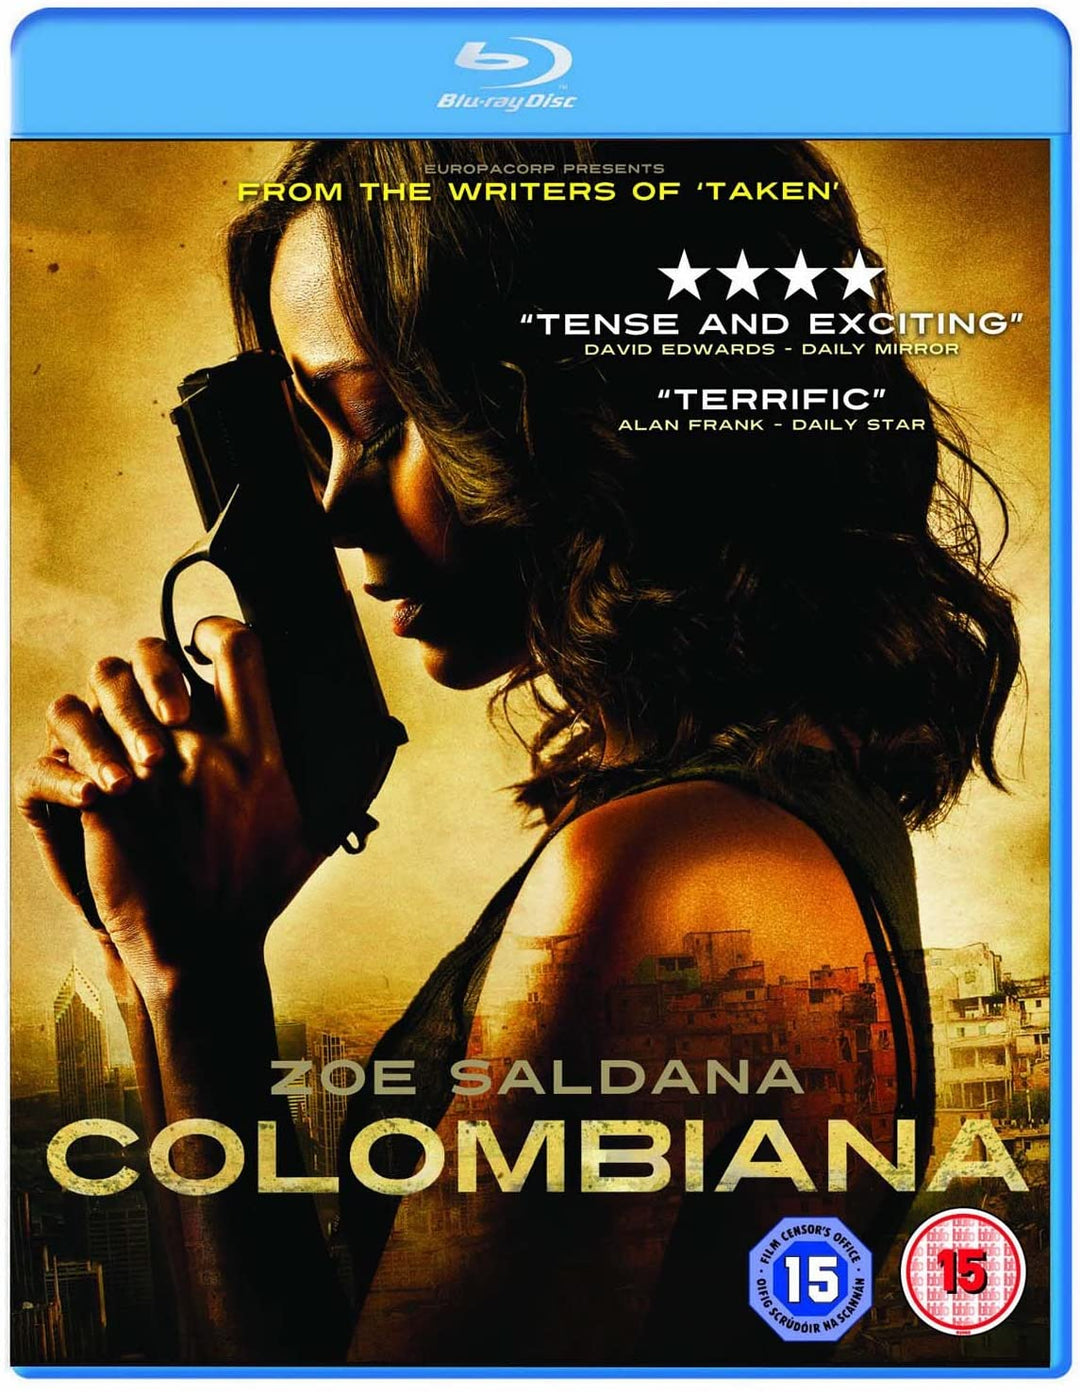 Colombiana – Action/Thriller [Blu-ray]